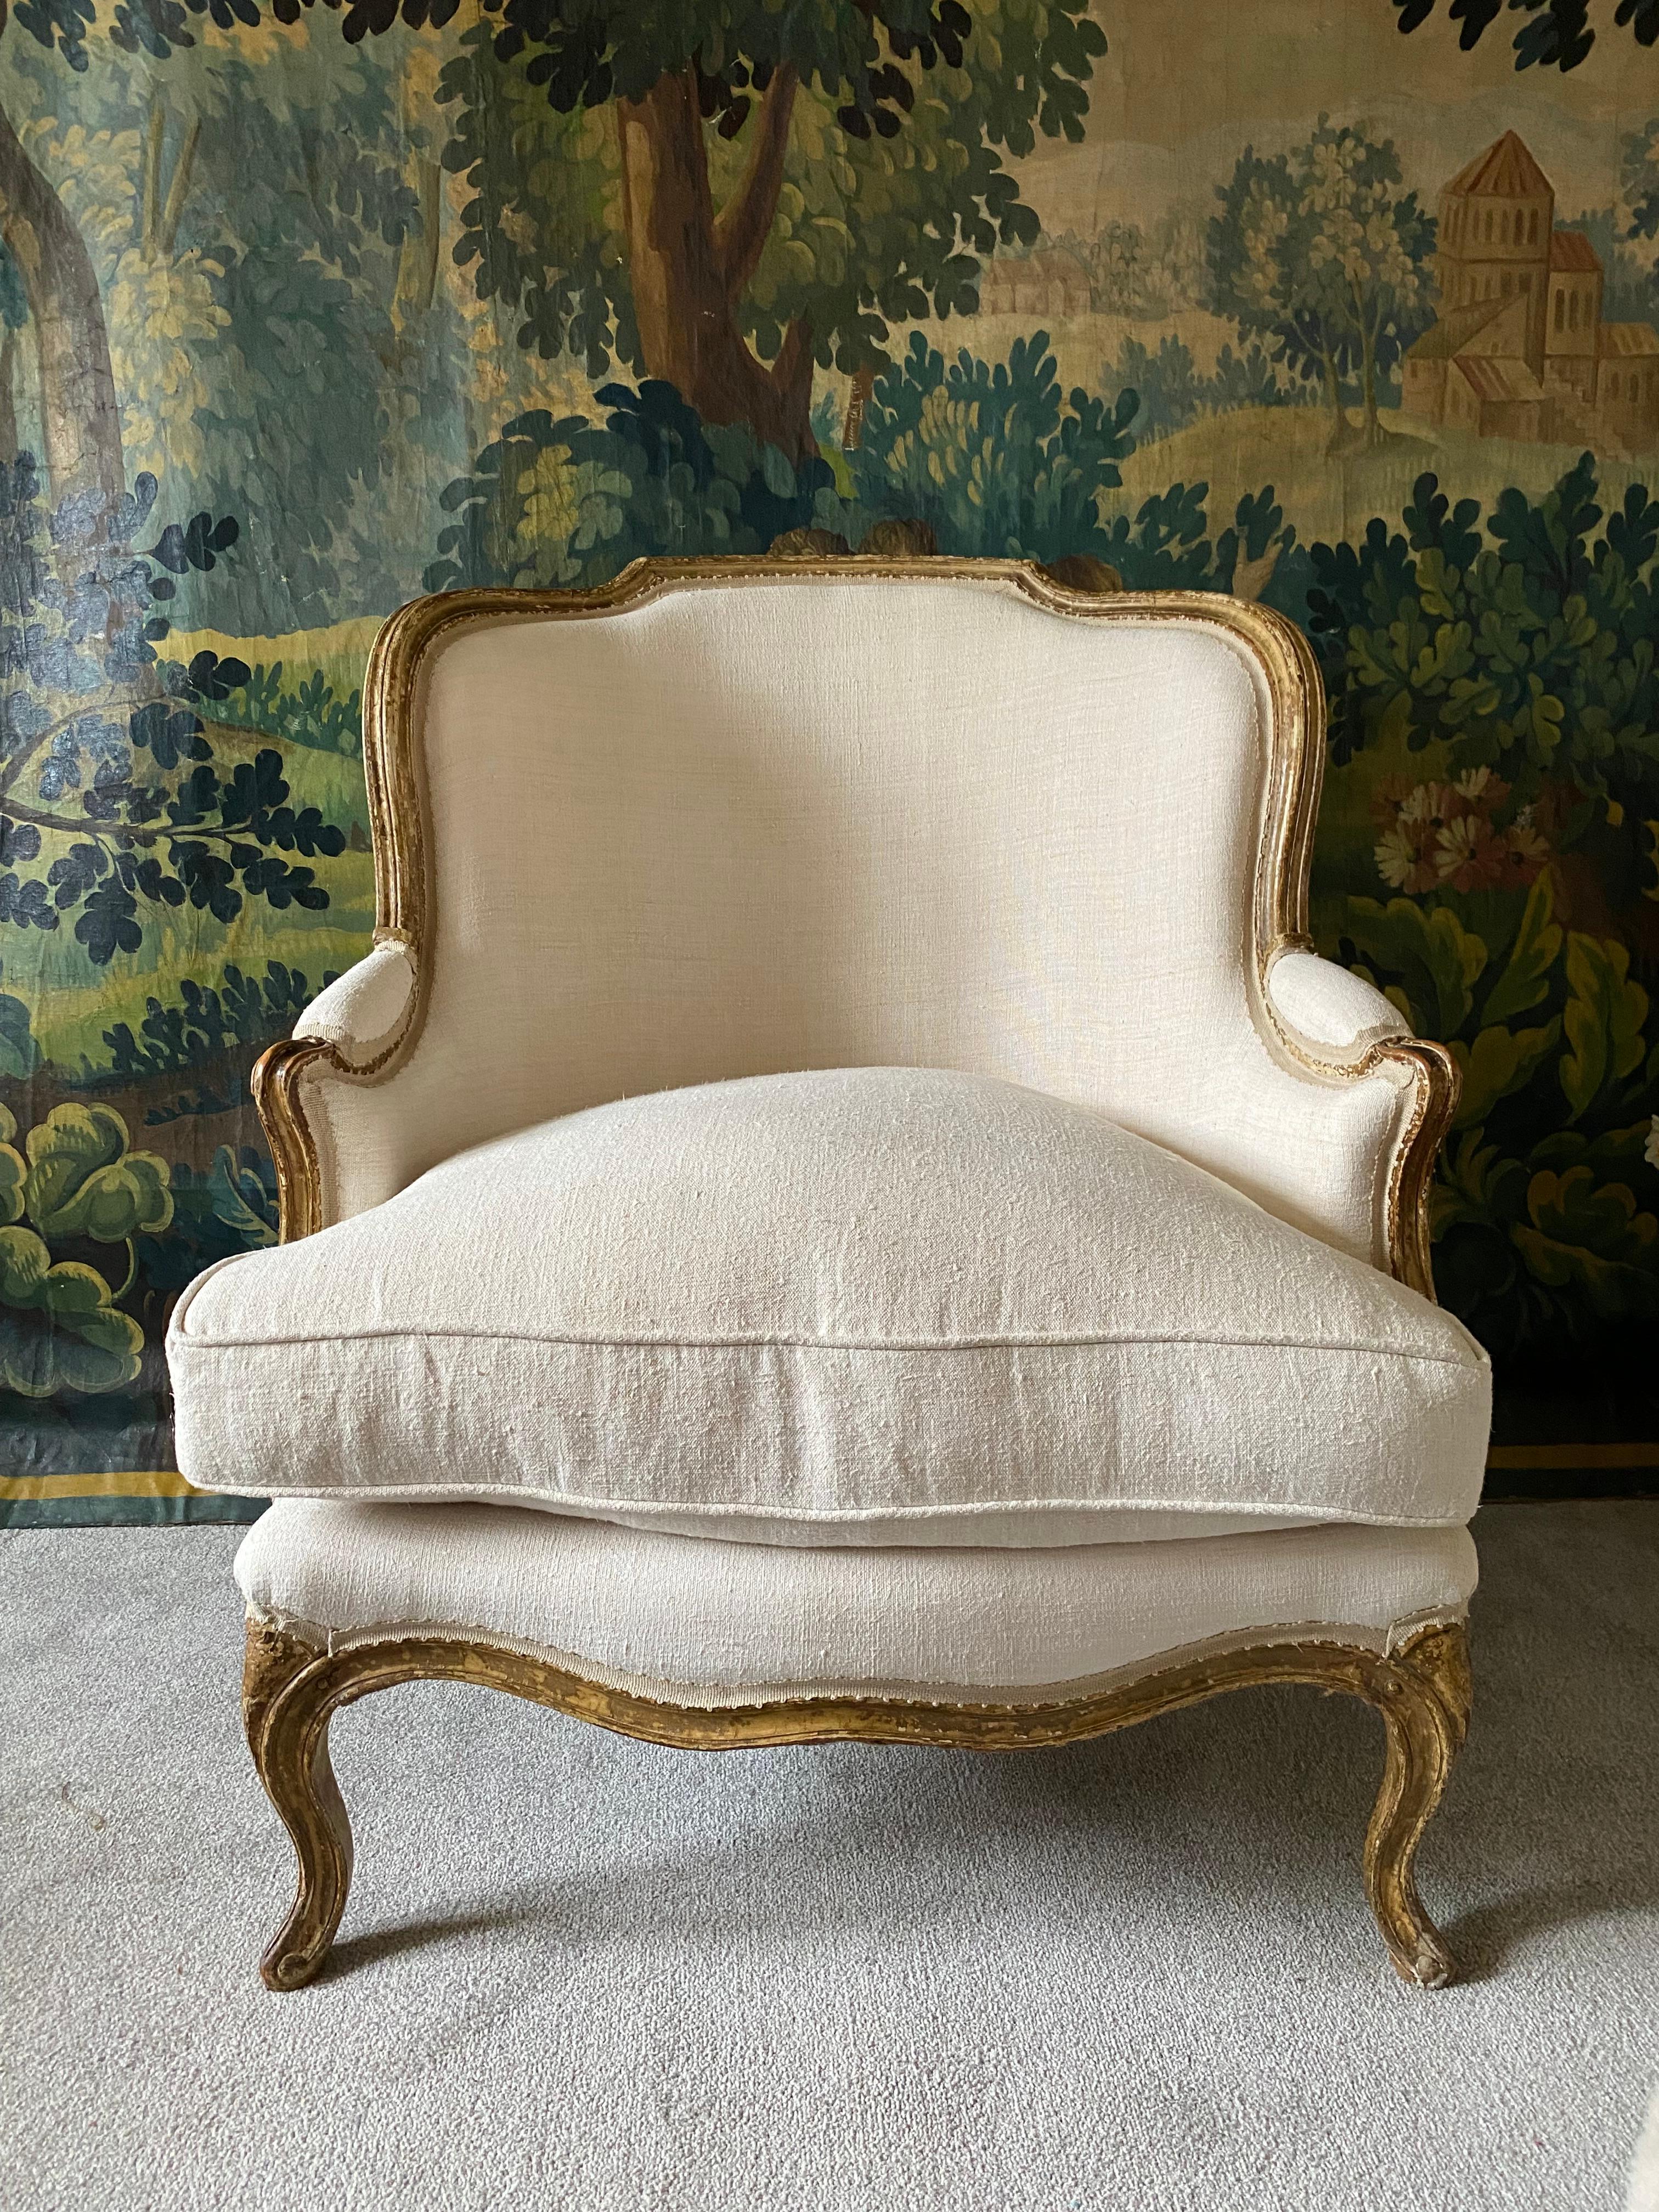 An exceptional high quality French gilded frame armchair of excellent proportions - larger than average with a plump feather seat cushion and extremely comfortable -  the framework has such soft gilding it resembles ochre coloured paint - I have had